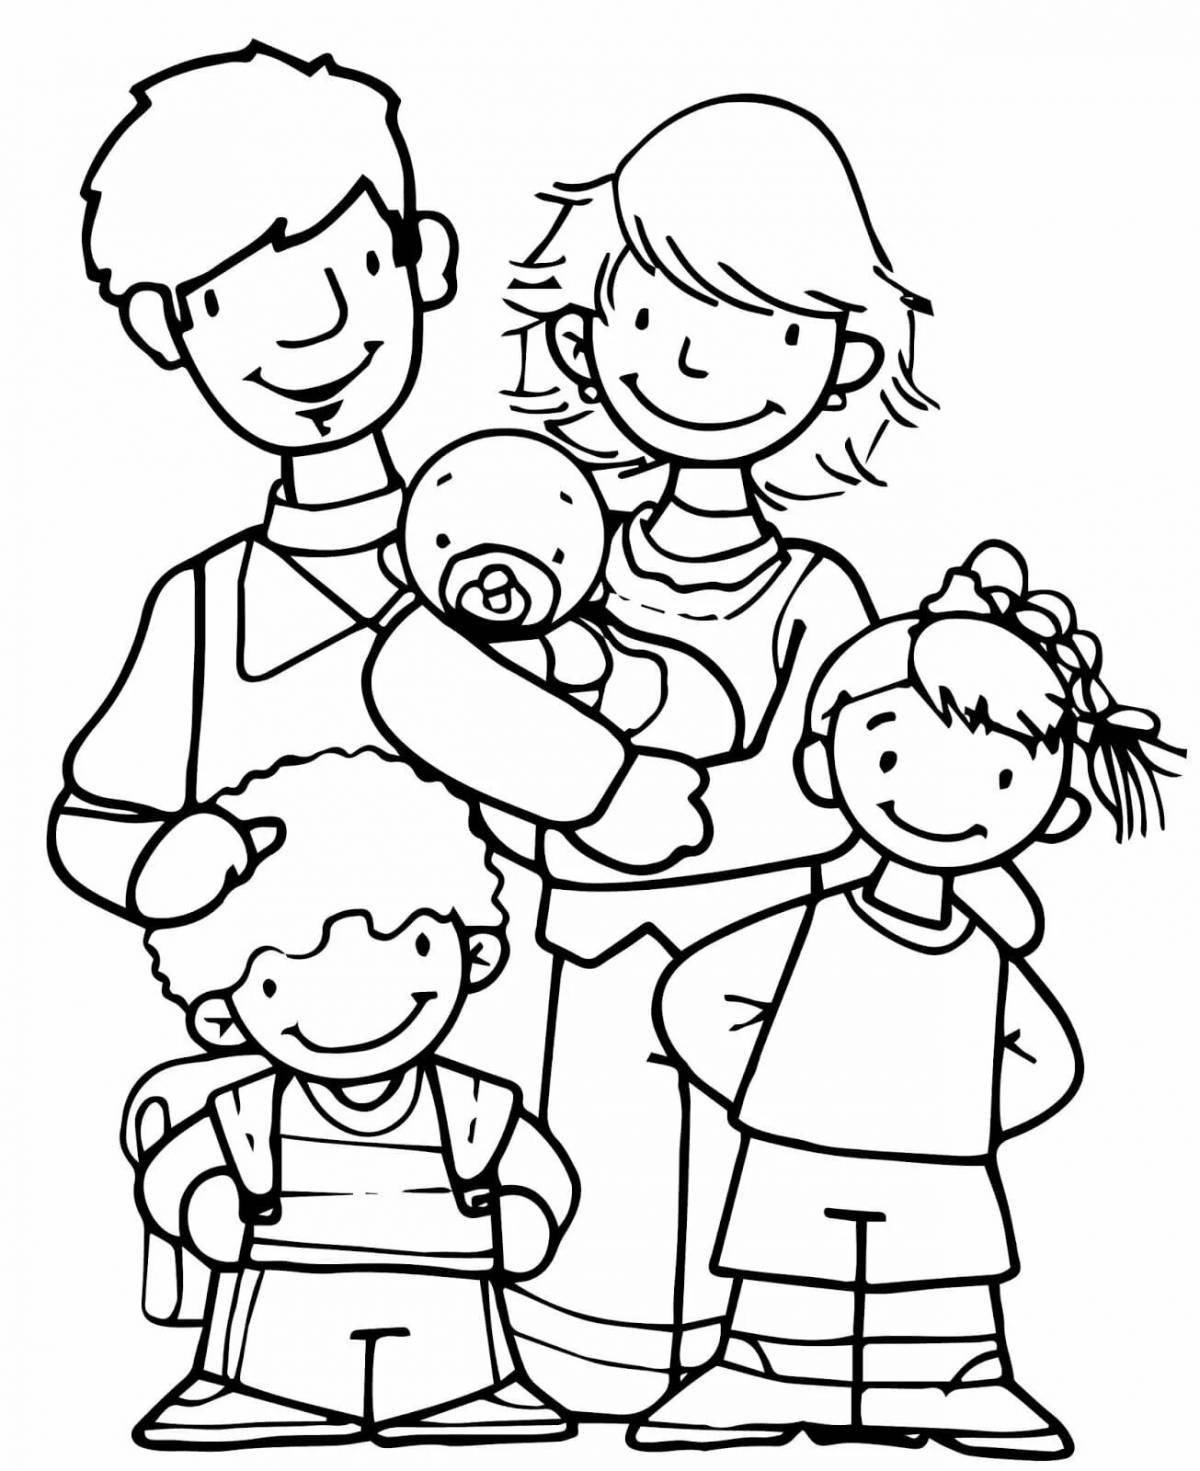 Bright family coloring book